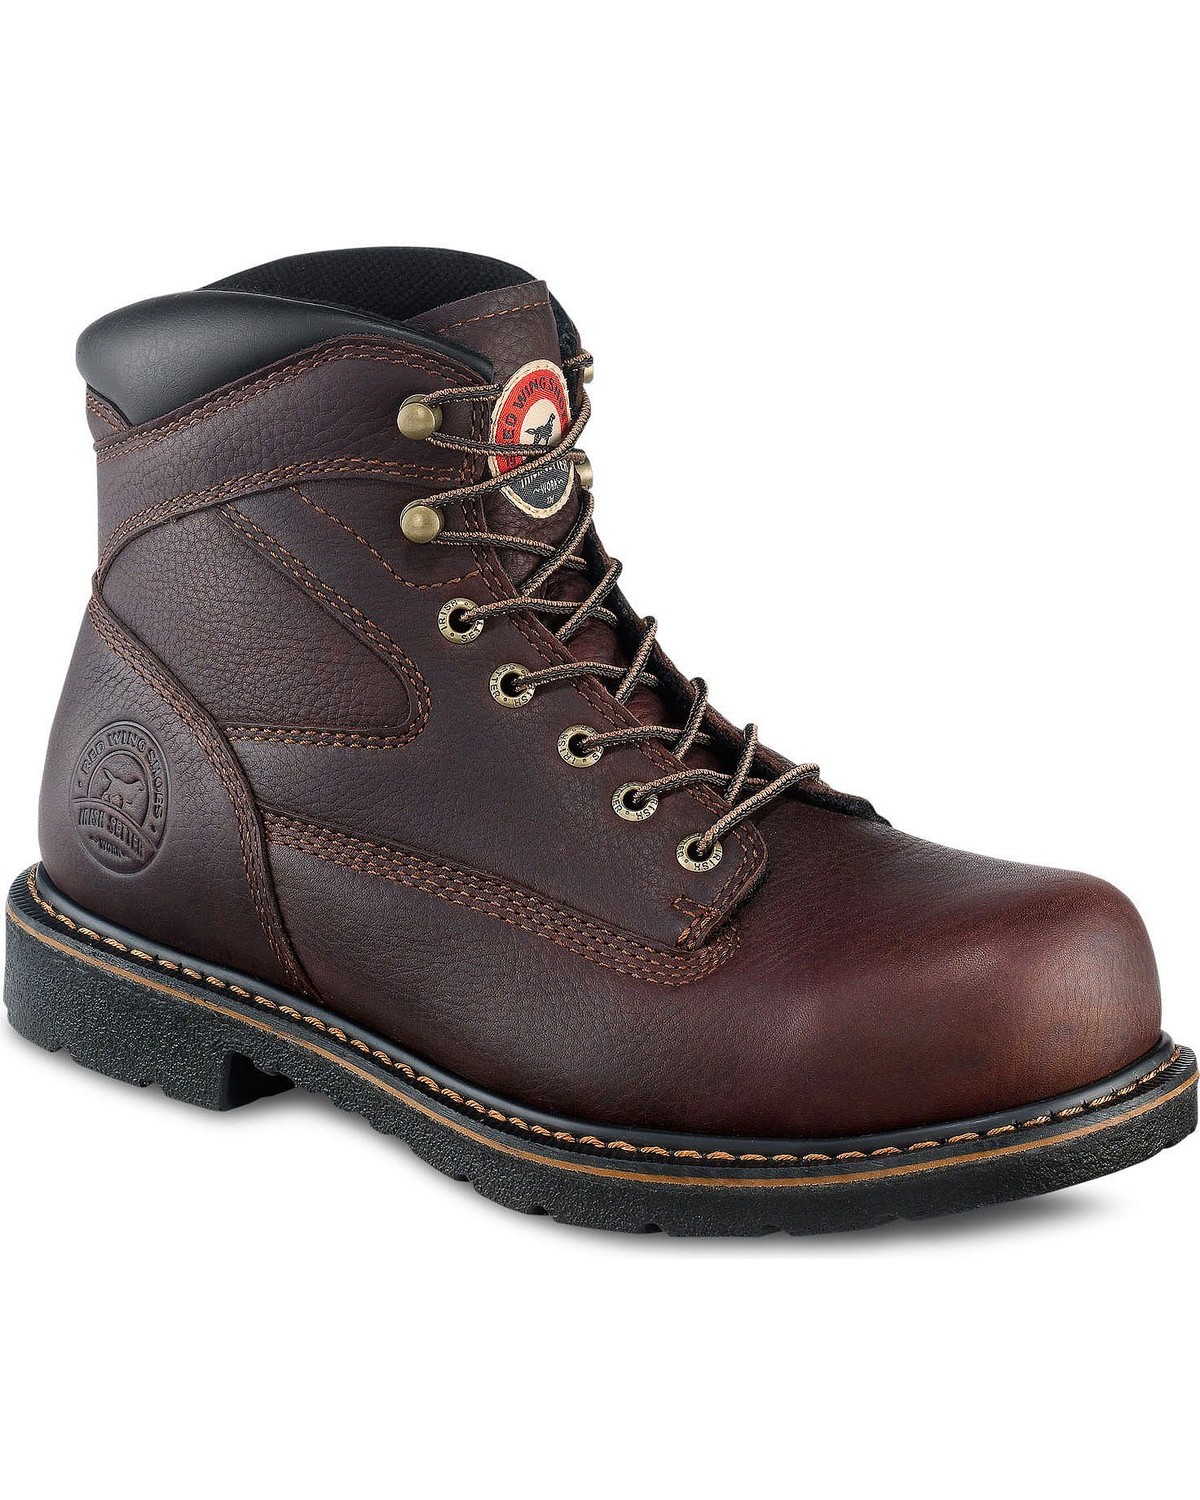 Red wing barn irish. Boot clipart construction boot